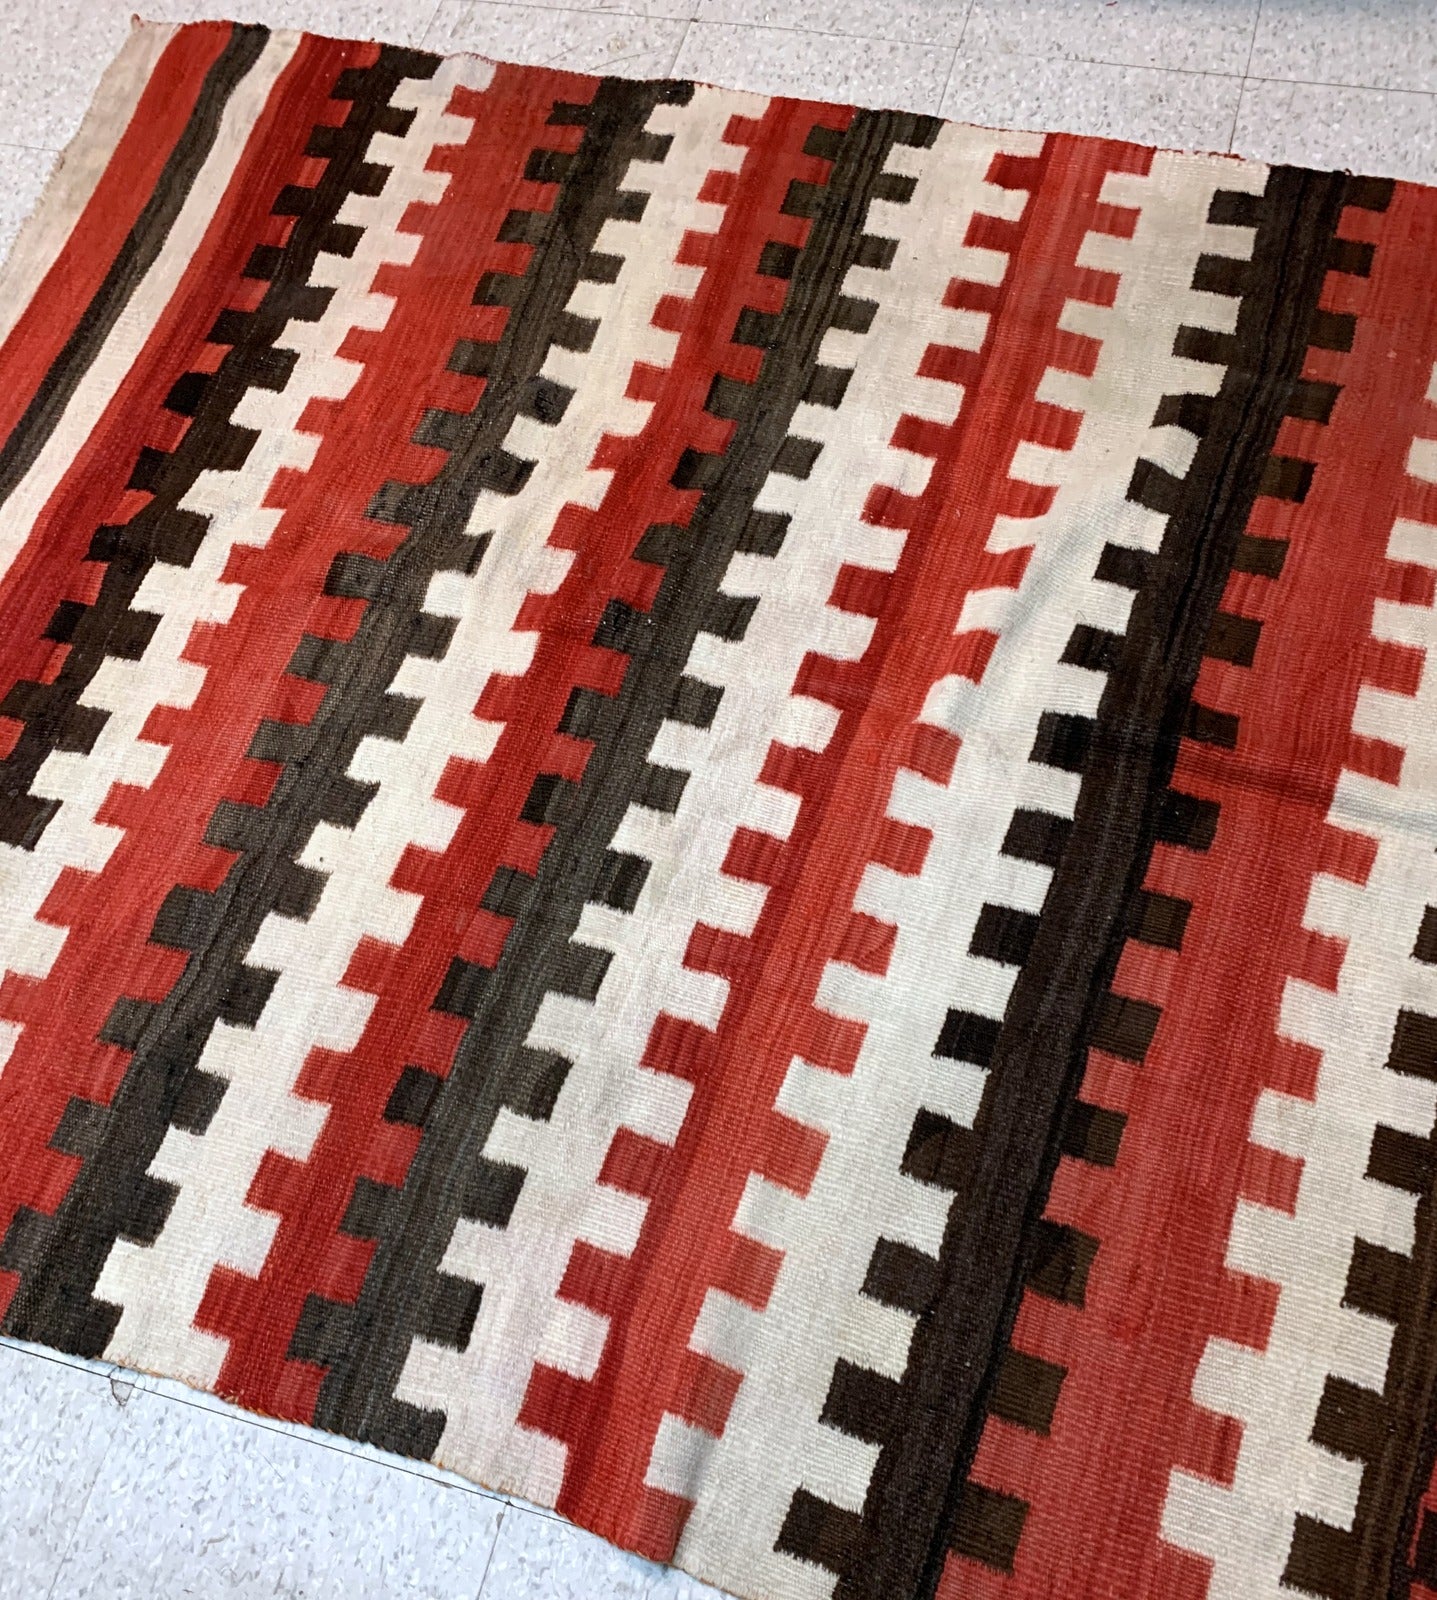 Antique hand-woven American-Indian Navajo blanket in original good condition. The blanket has been made in the end of 19th century in bright red, chocolate brown and white shades.